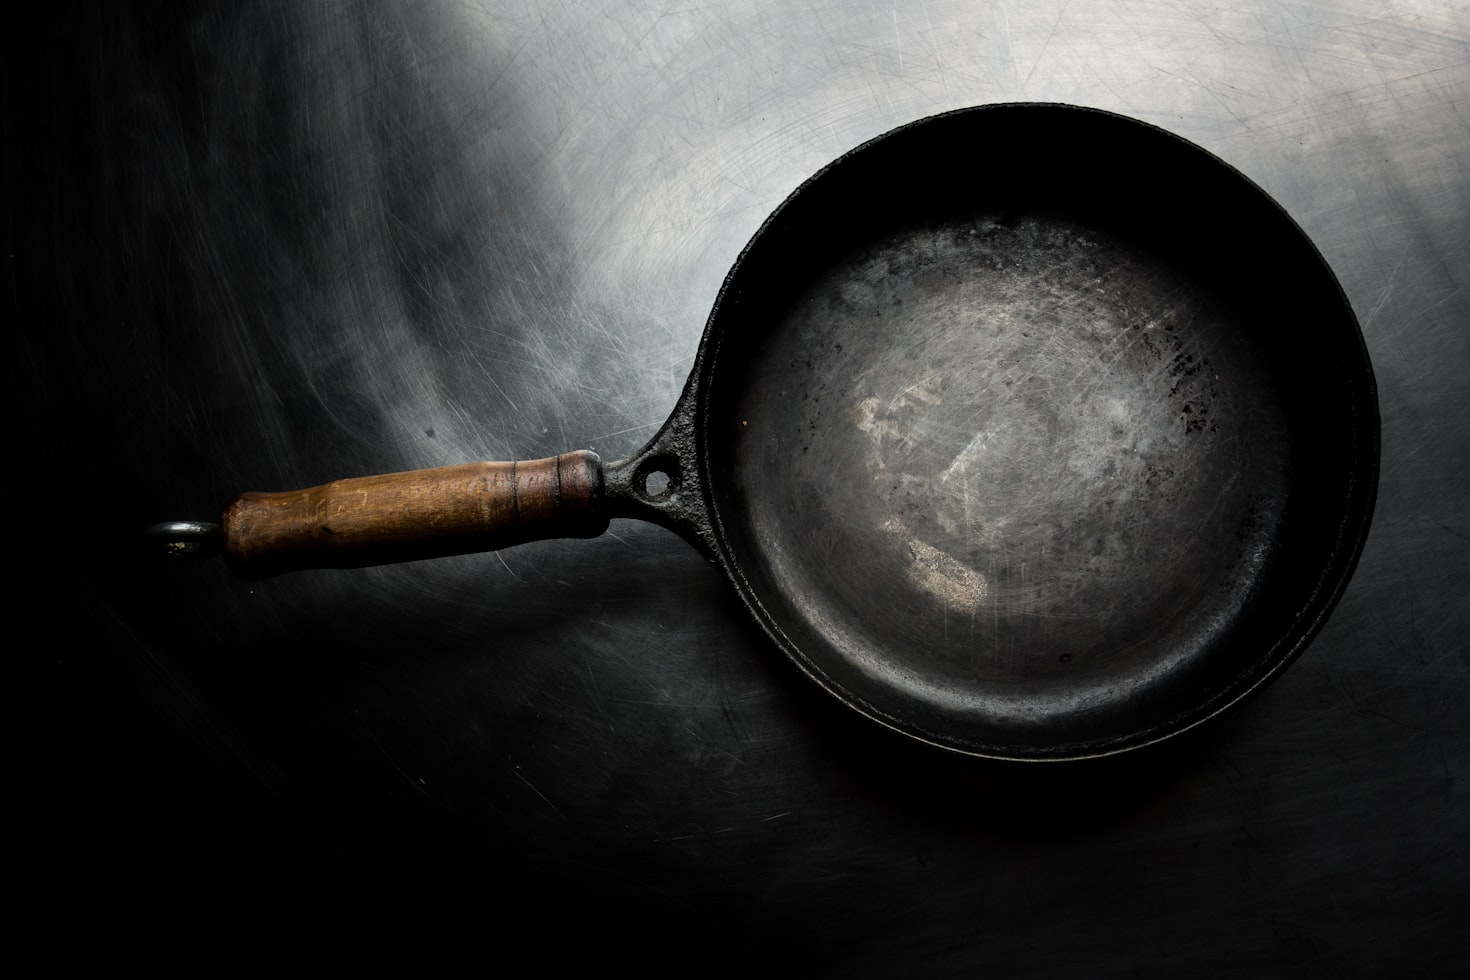 image of a wok